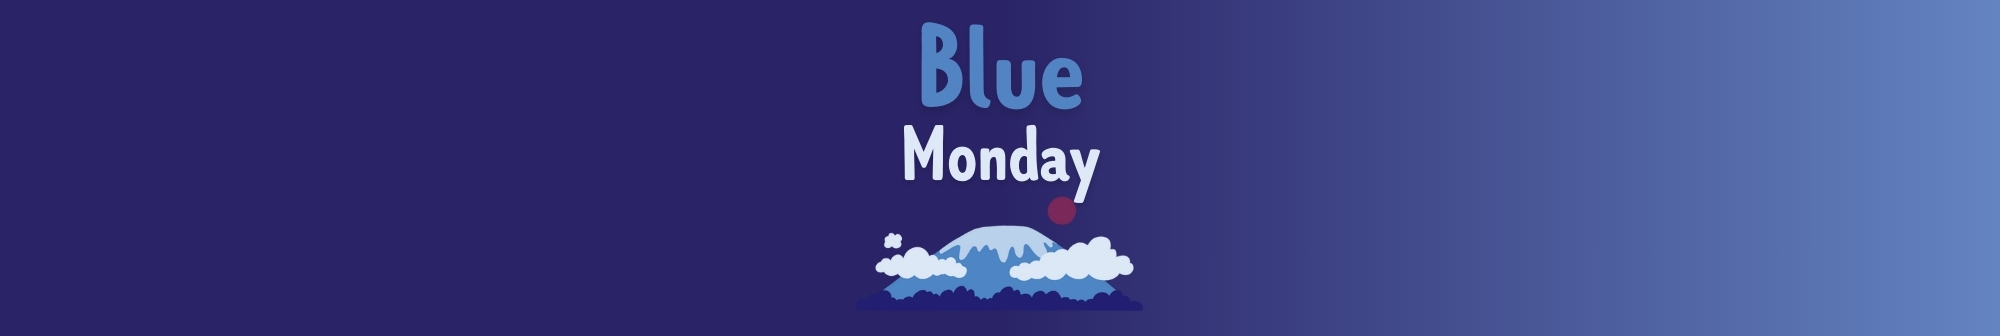 the-words-blue-monday-above-an-illustration-of-a-mountain